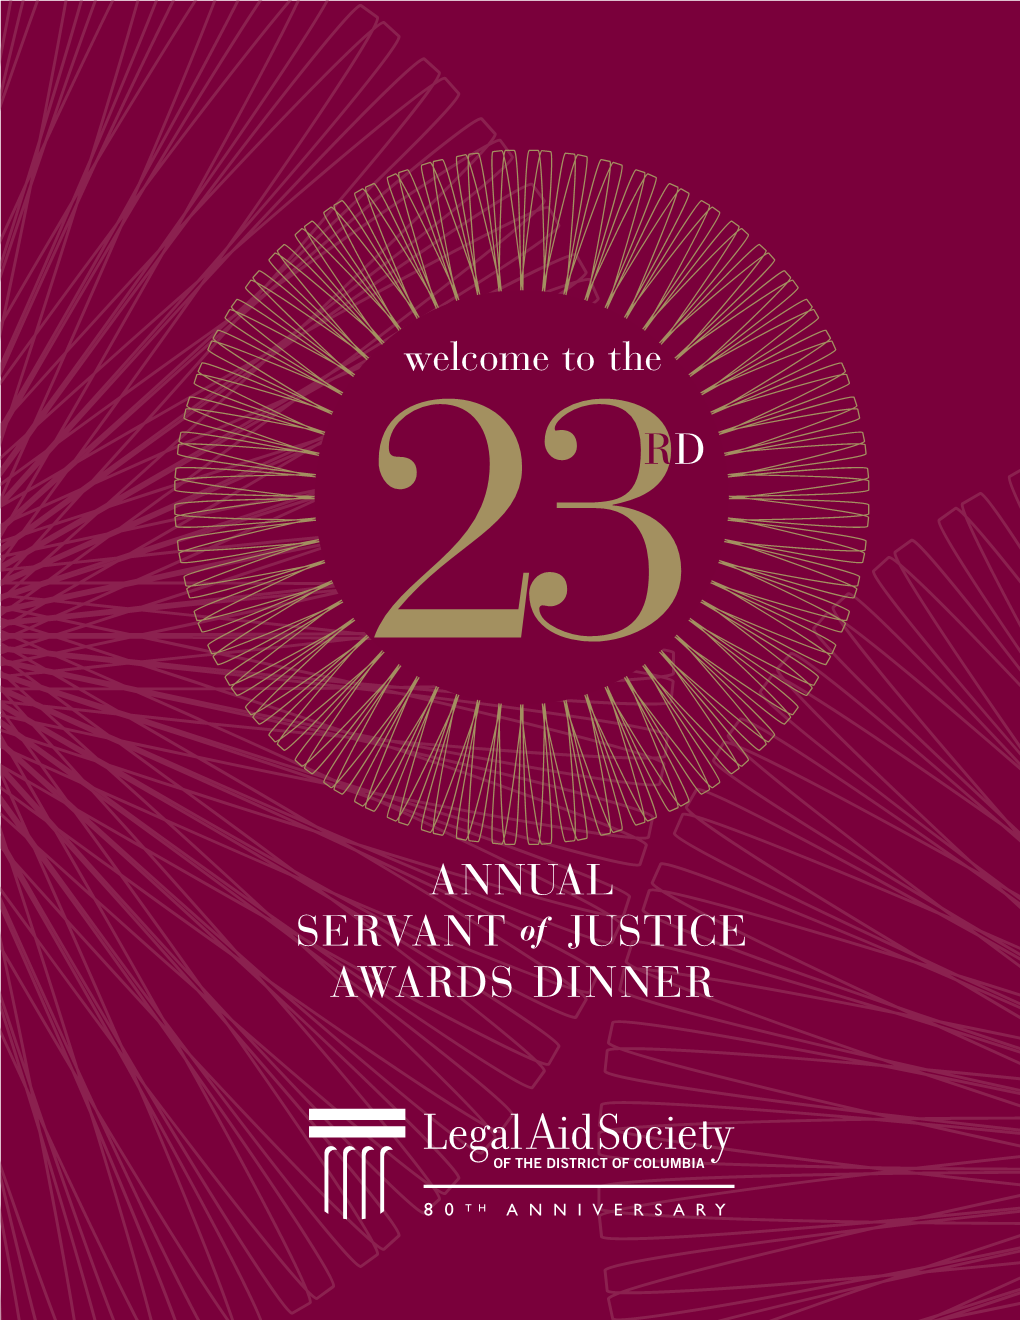 ANNUAL SERVANT of JUSTICE AWARDS DINNER RD